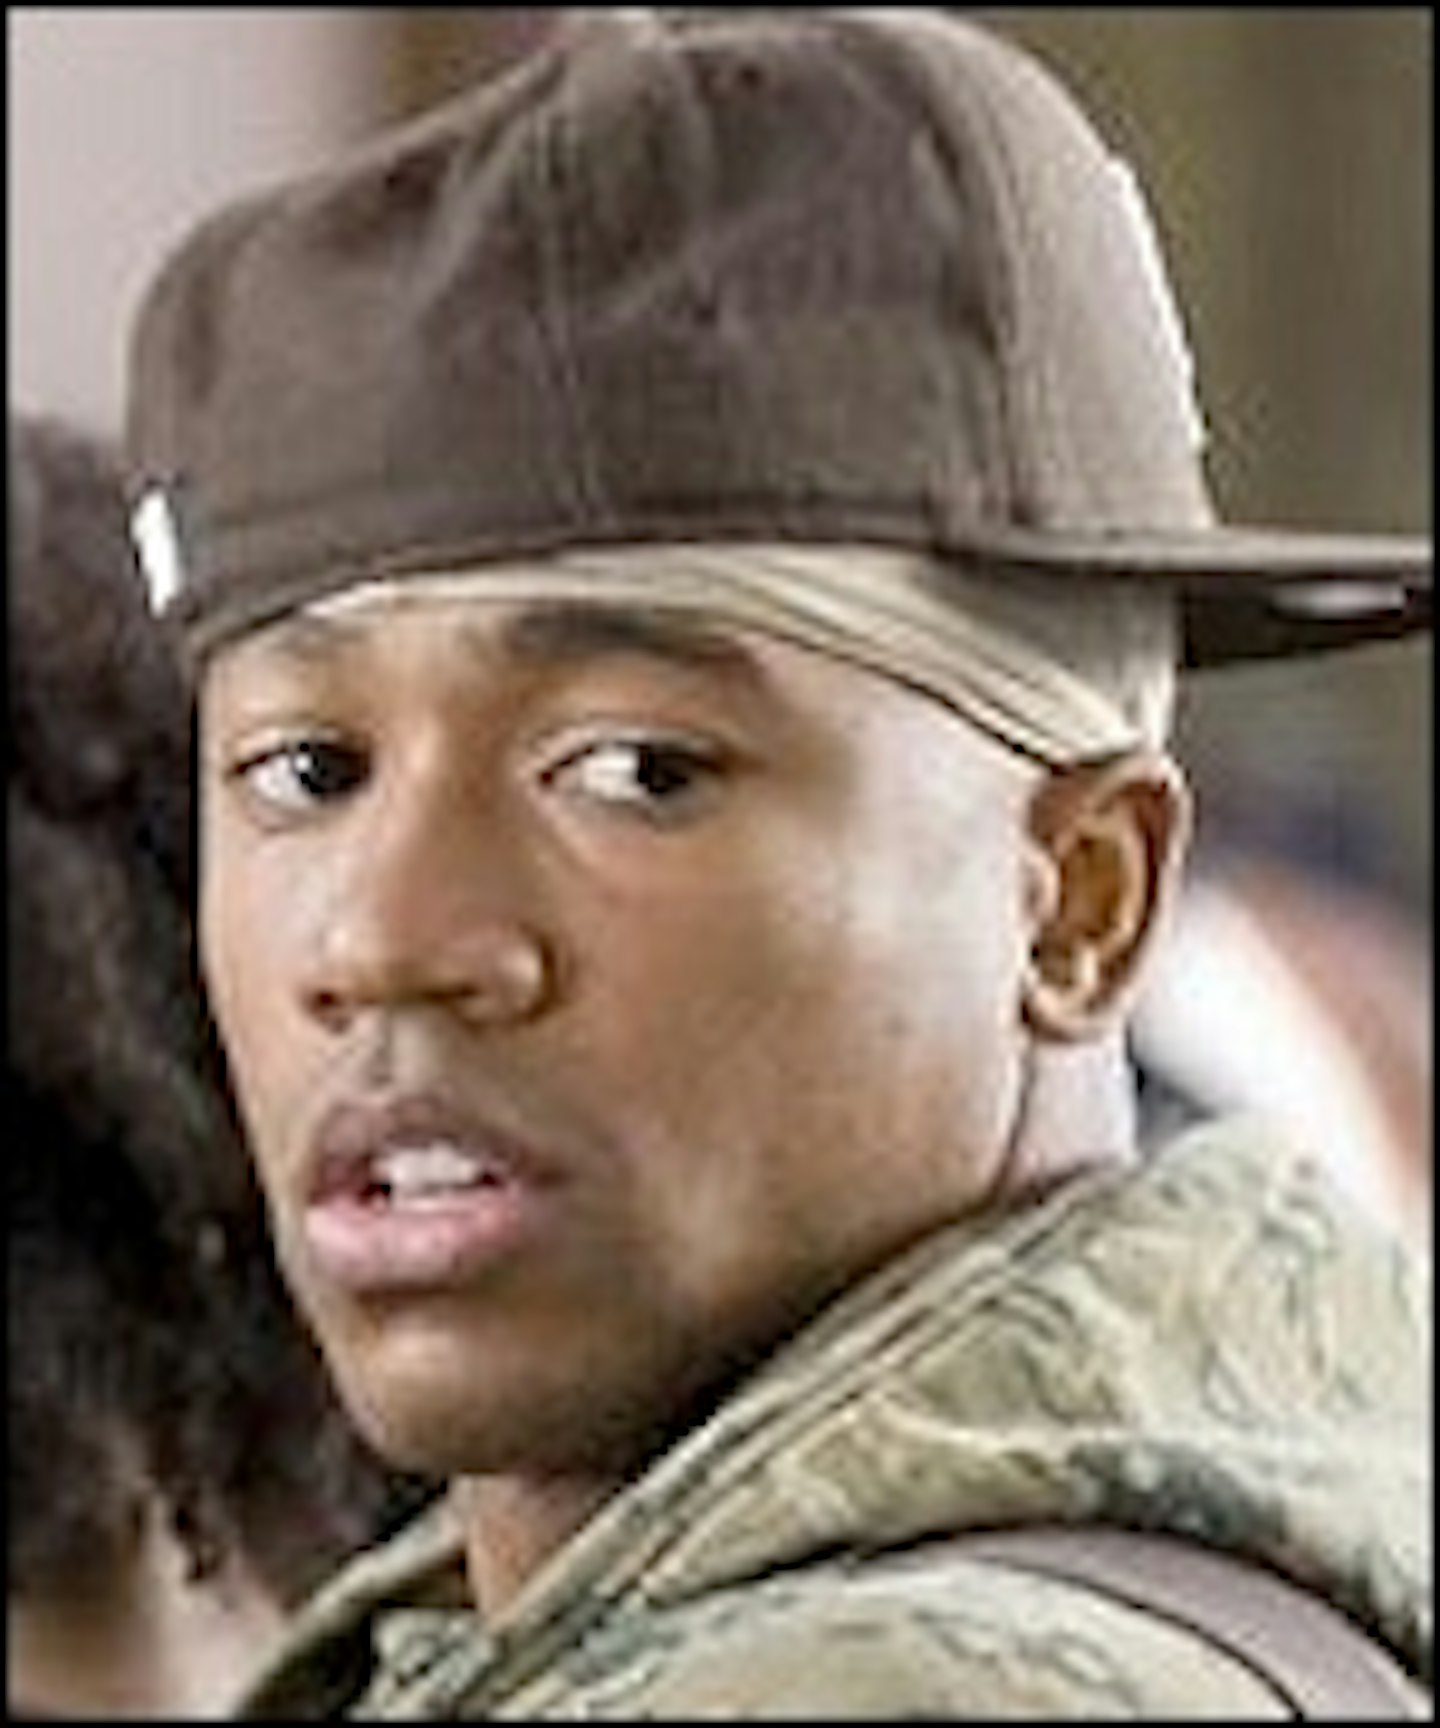 Columbus Short Gets Into Trouble